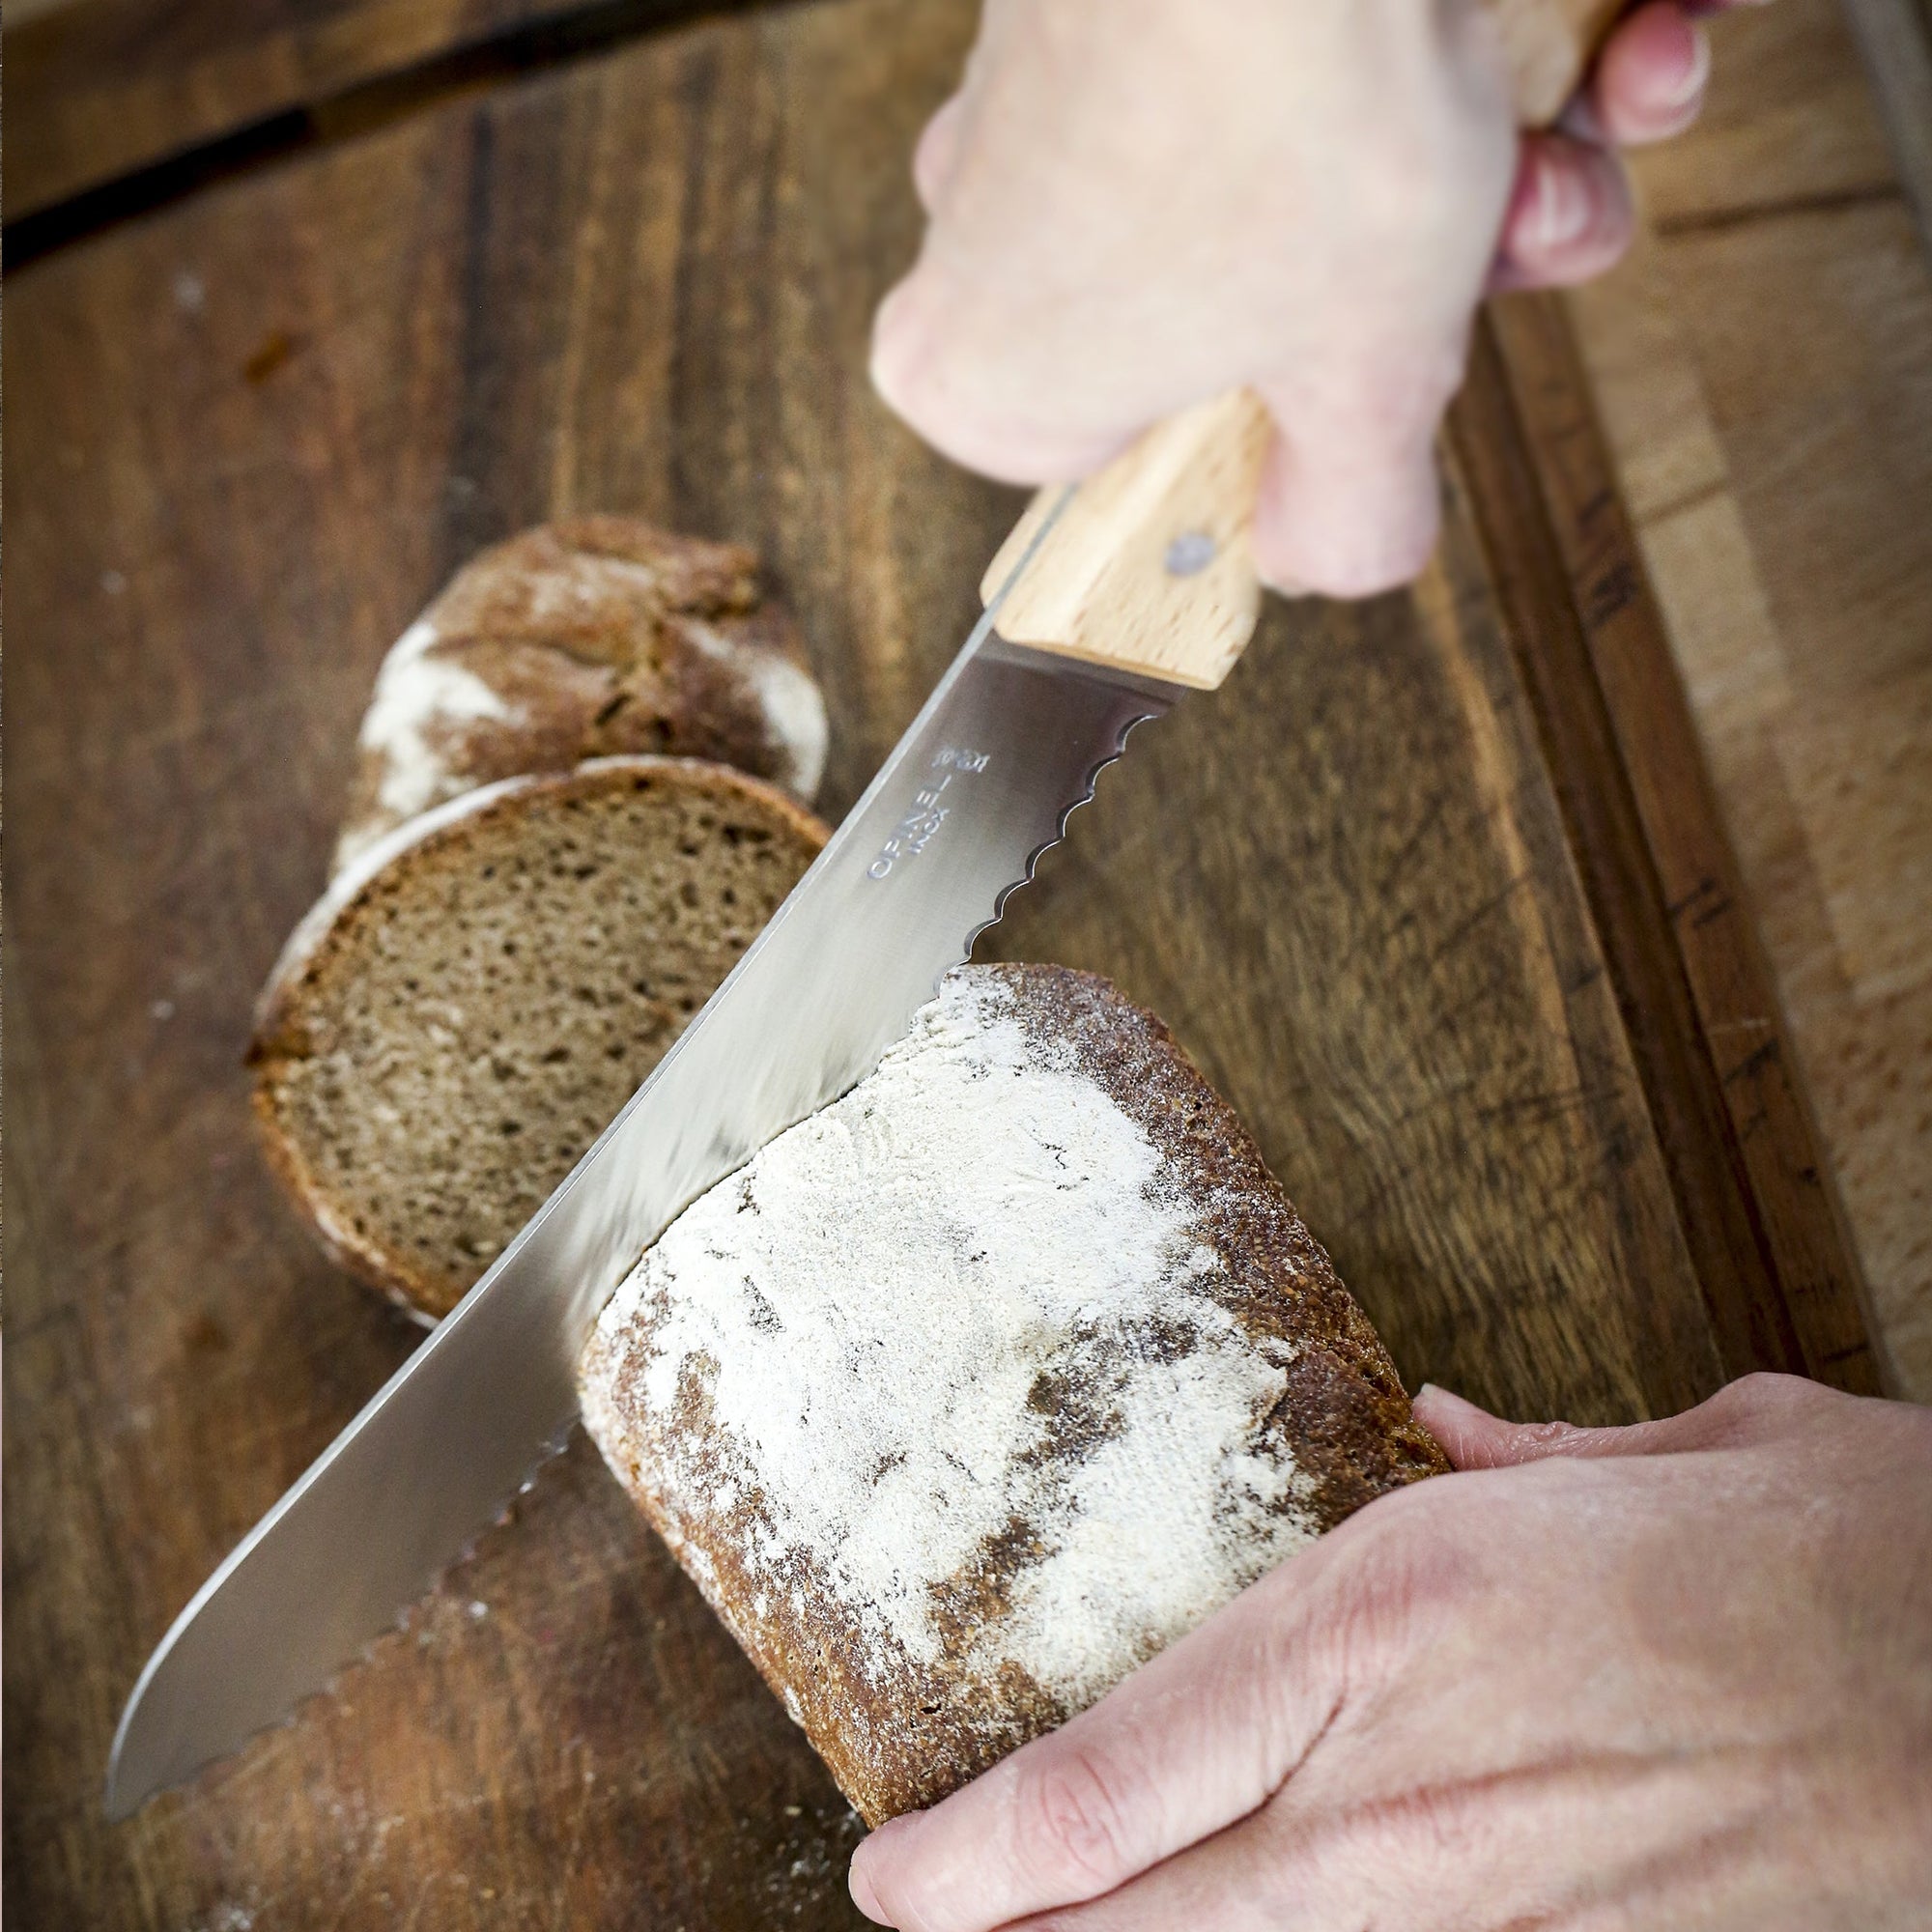 Best bread cutting boards - The Bread She Bakes